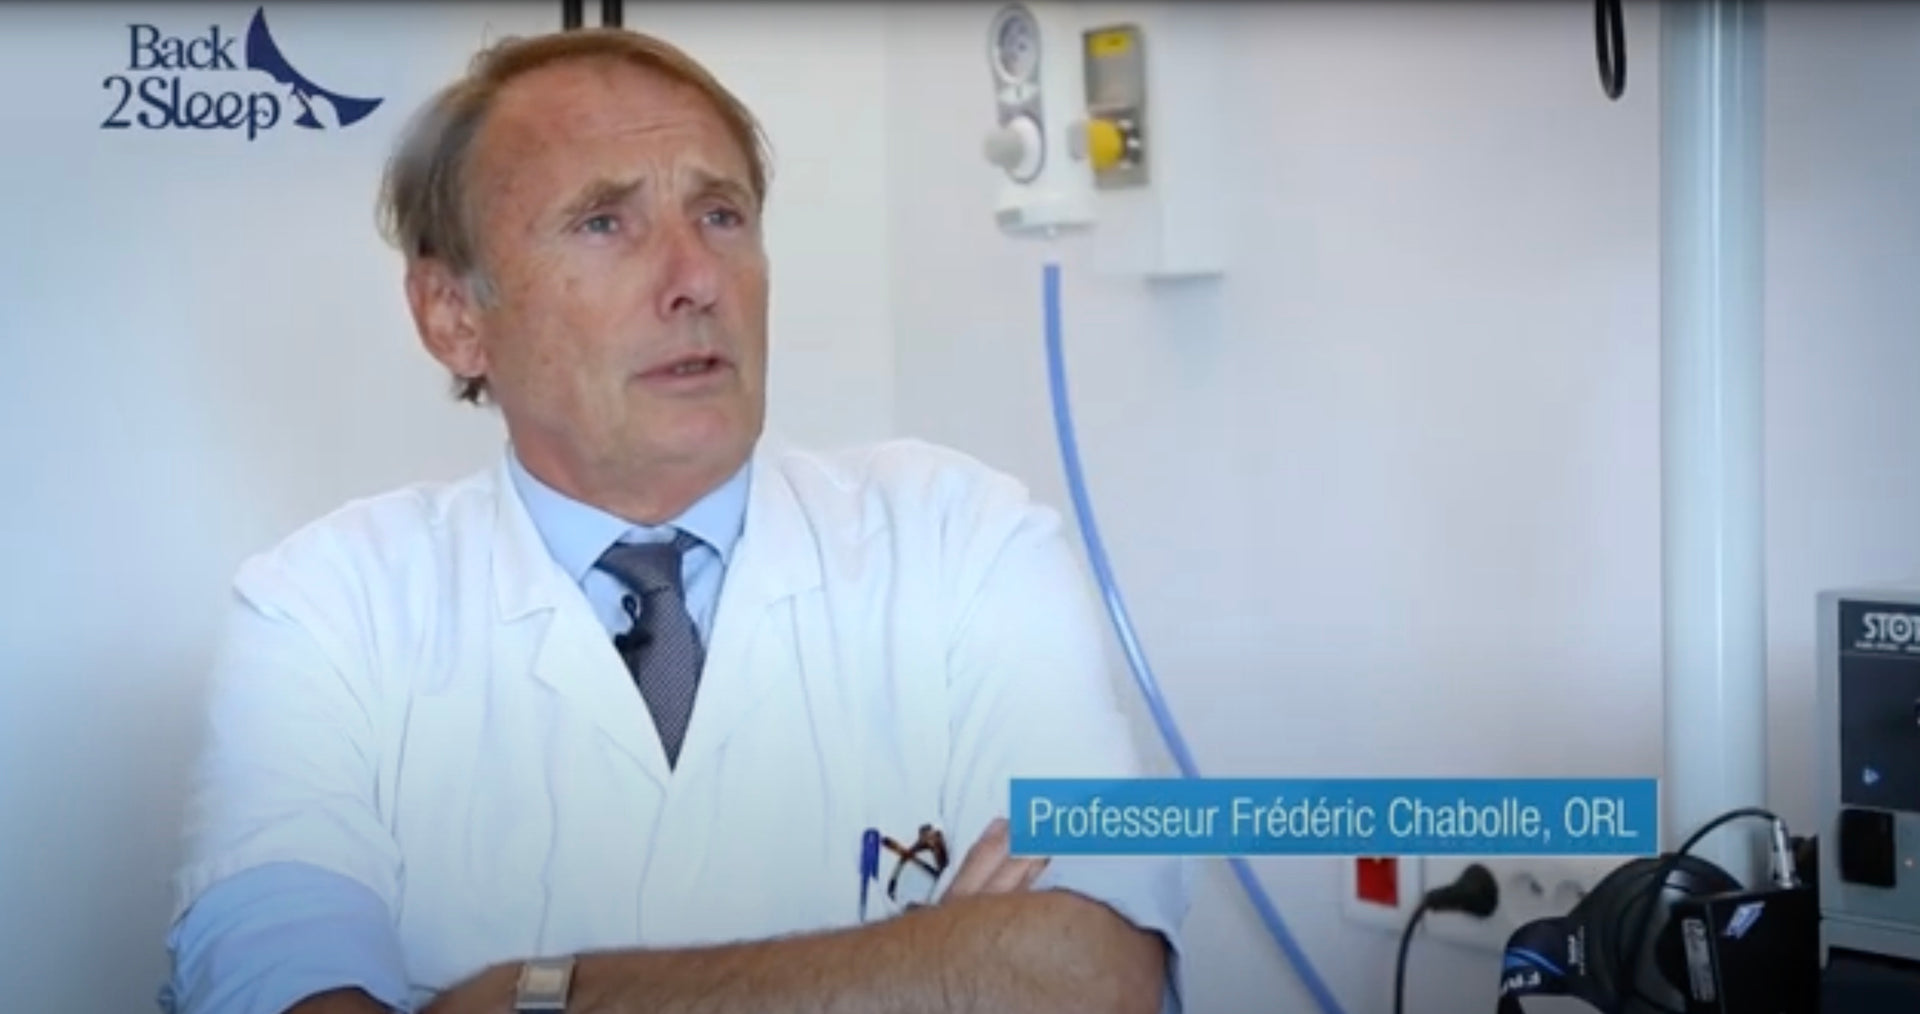 Load video: Professor Chabolle explains the causes of snoring, sleep apnea, and the mechanism of action of Back2Sleep (in French with English subtitles).